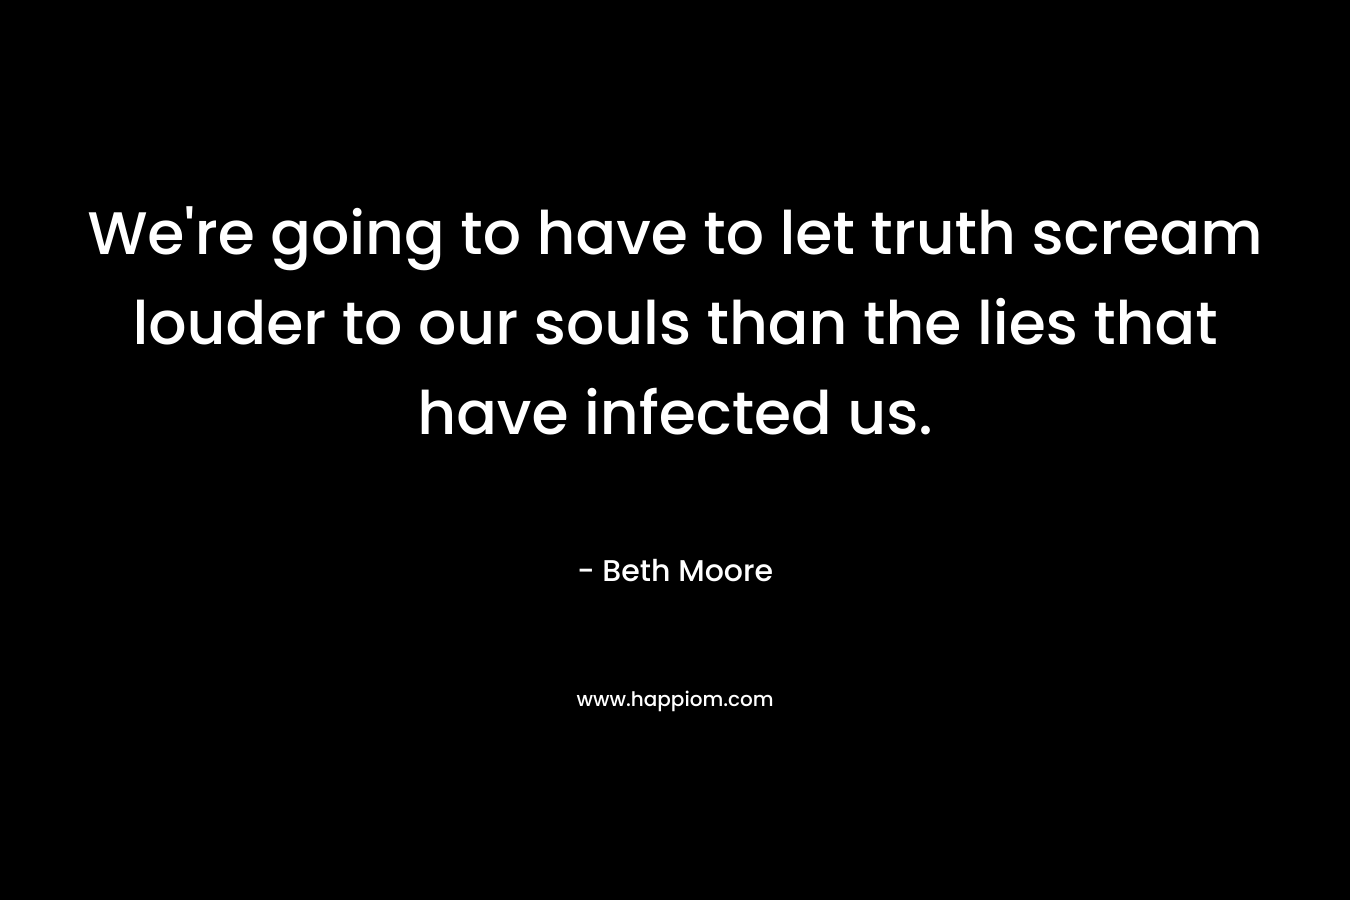 We’re going to have to let truth scream louder to our souls than the lies that have infected us. – Beth Moore